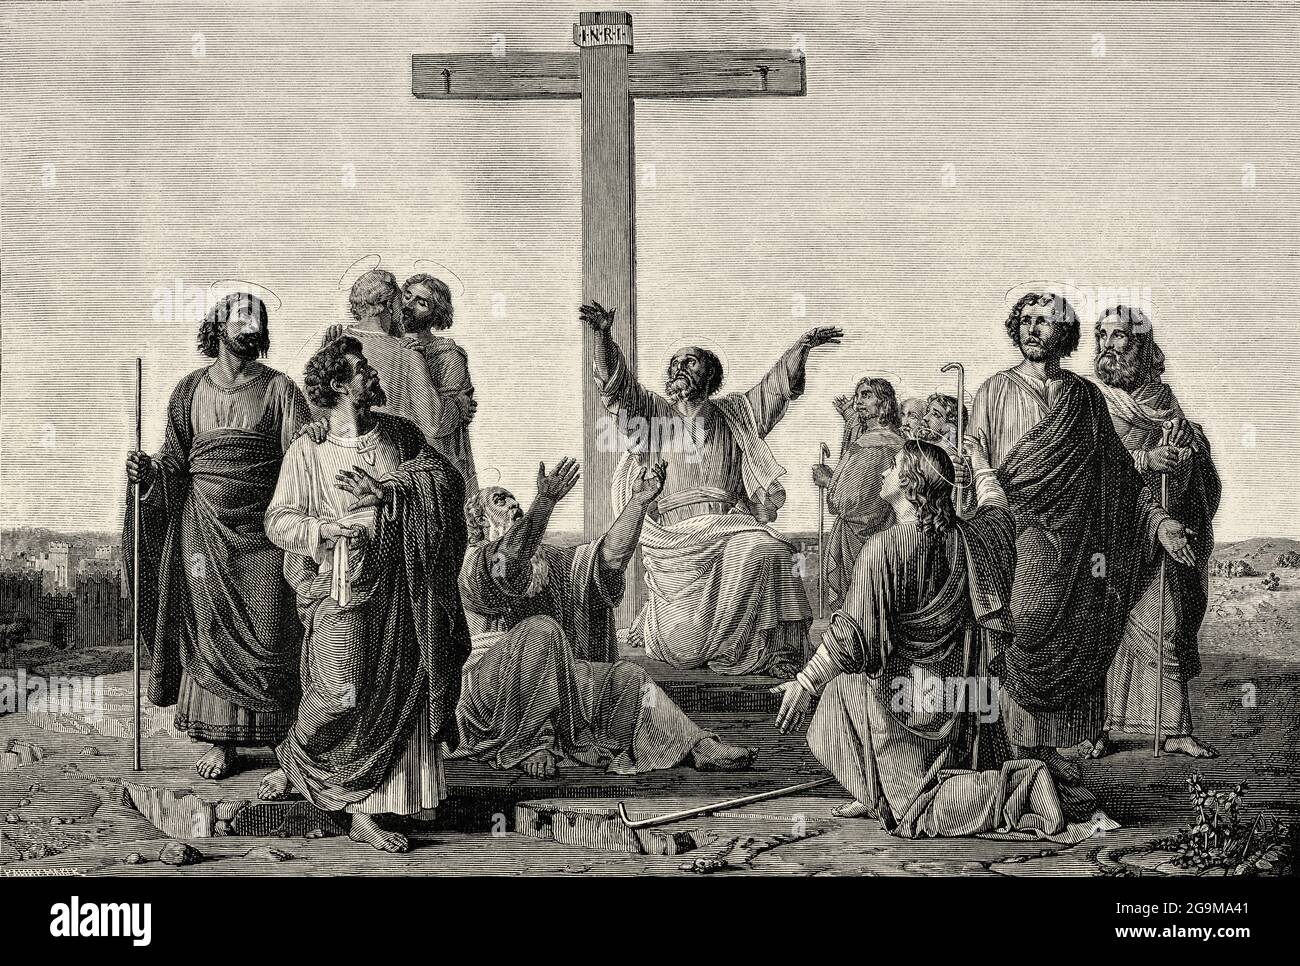 The Mission of the Apostles. The apostles gathered at the foot of the cross separate to preach the gospel to the nations. Old 19th century engraved illustration from Jesus Christ by Veuillot 1881 Stock Photo